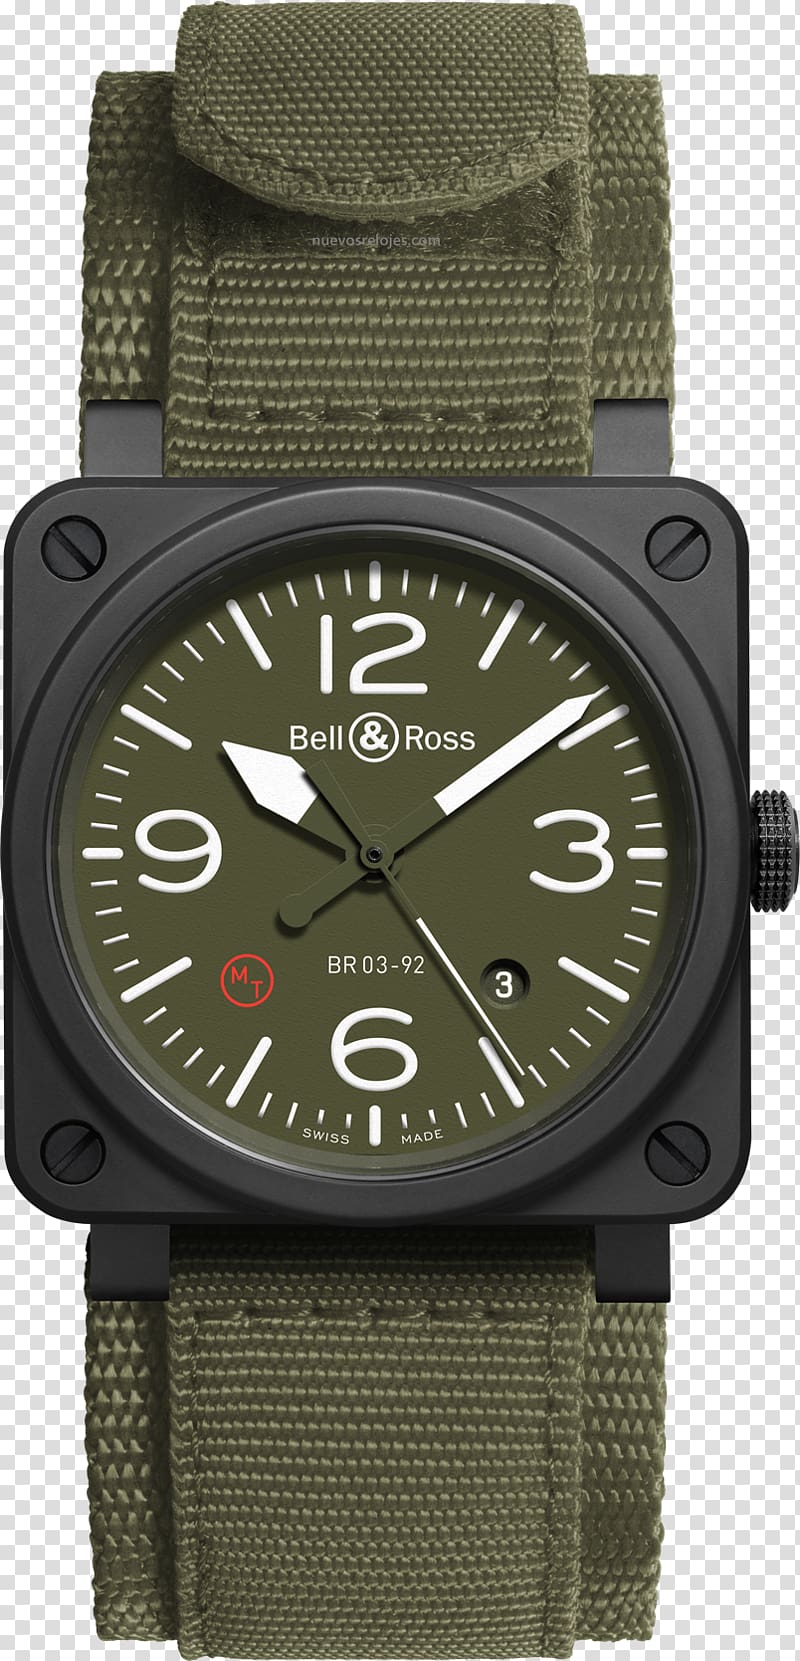 Bell & Ross, Inc. Automatic watch Swiss made, watch transparent background PNG clipart